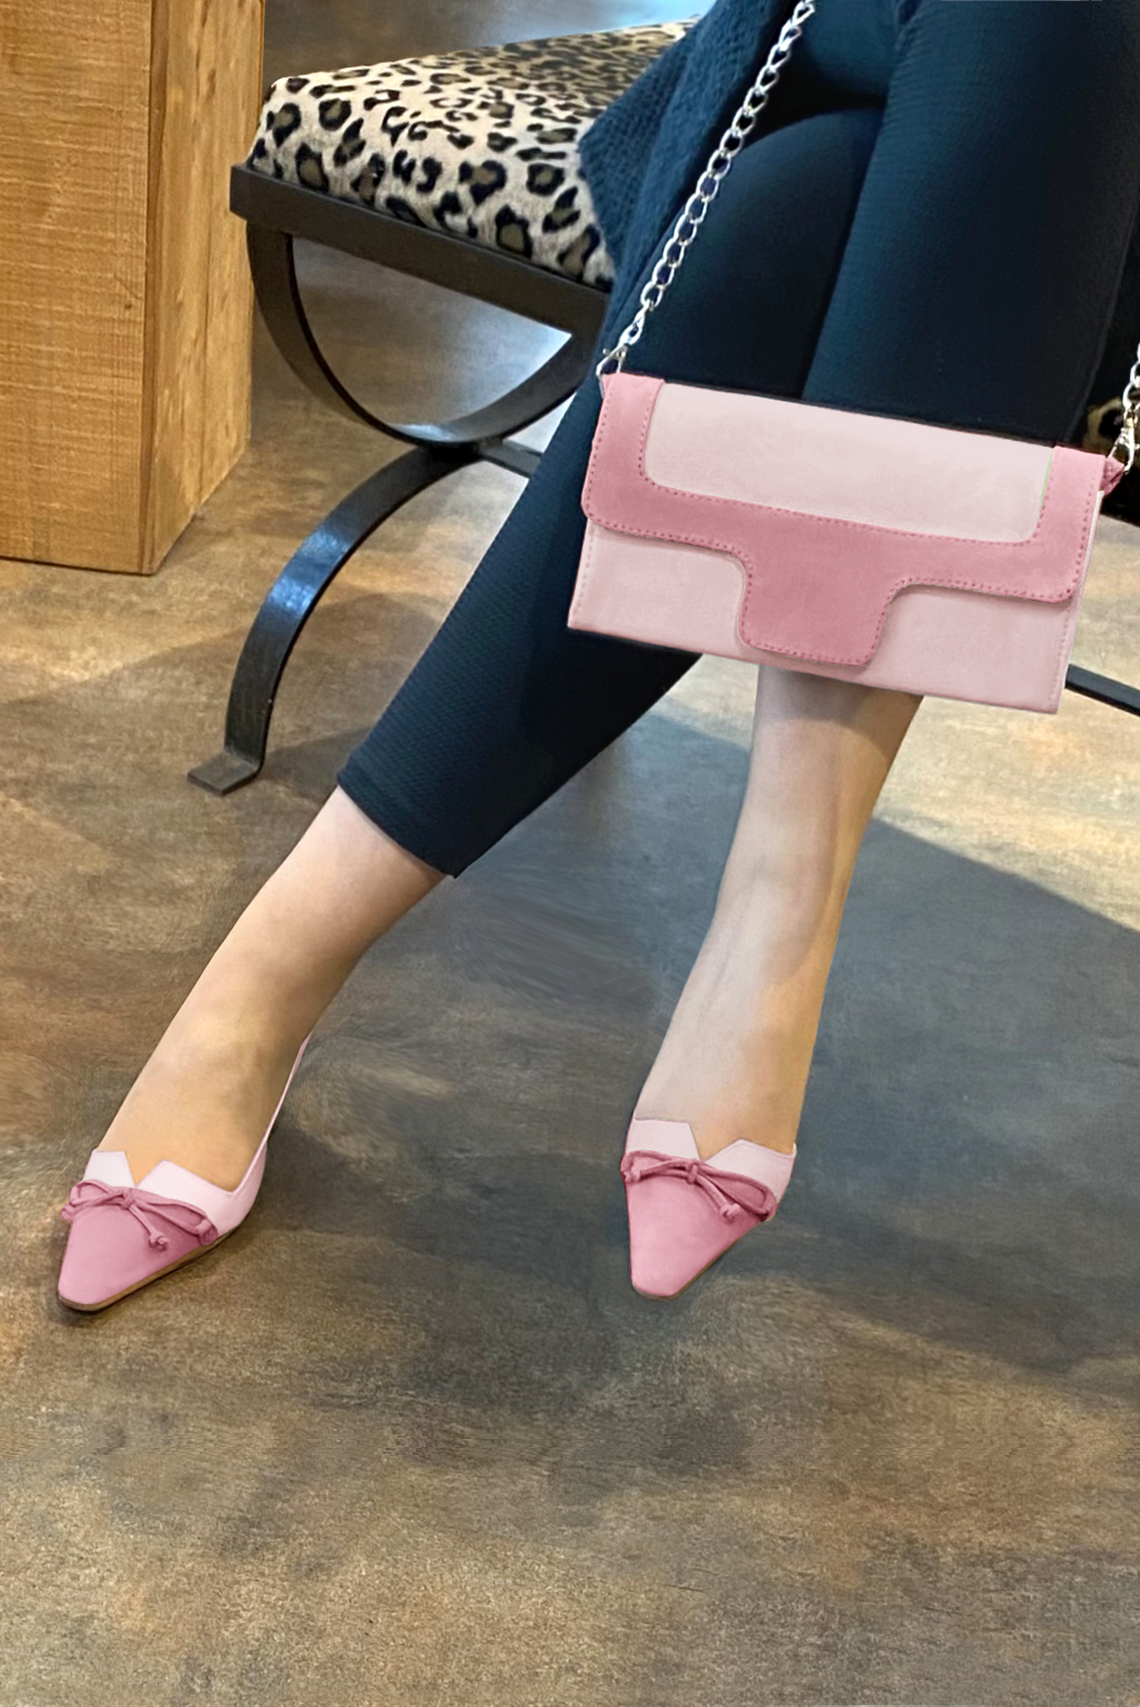 Carnation pink matching shoes, clutch and . Worn view - Florence KOOIJMAN